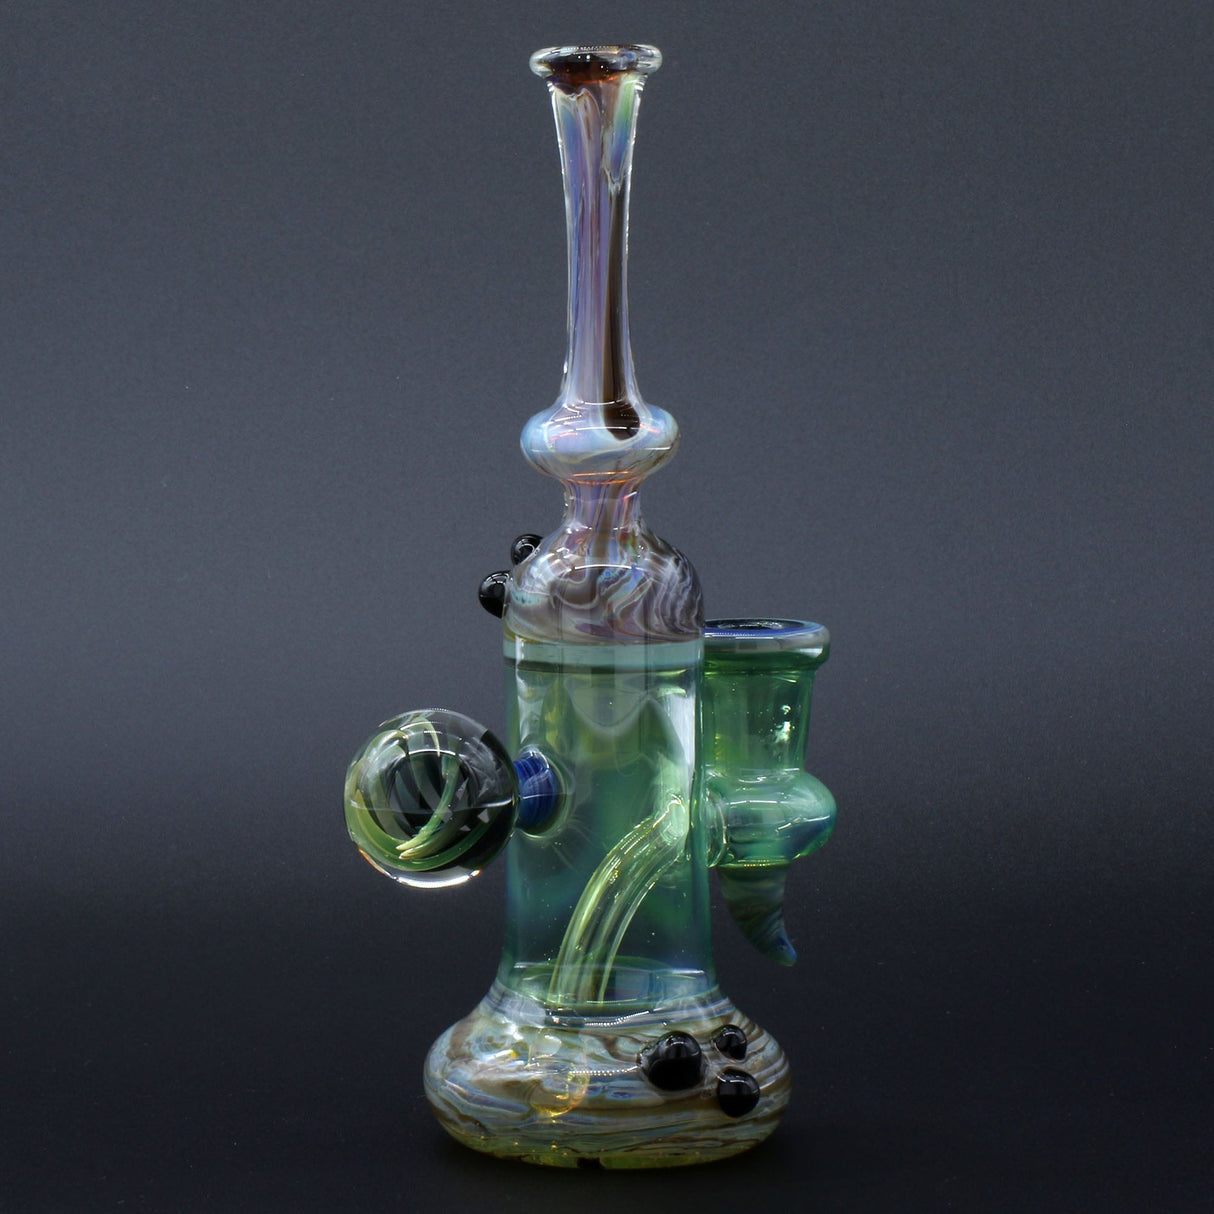 Clayball Glass "Enclave Nebula" Heady Sherlock Dab-Rig with intricate glasswork, front view